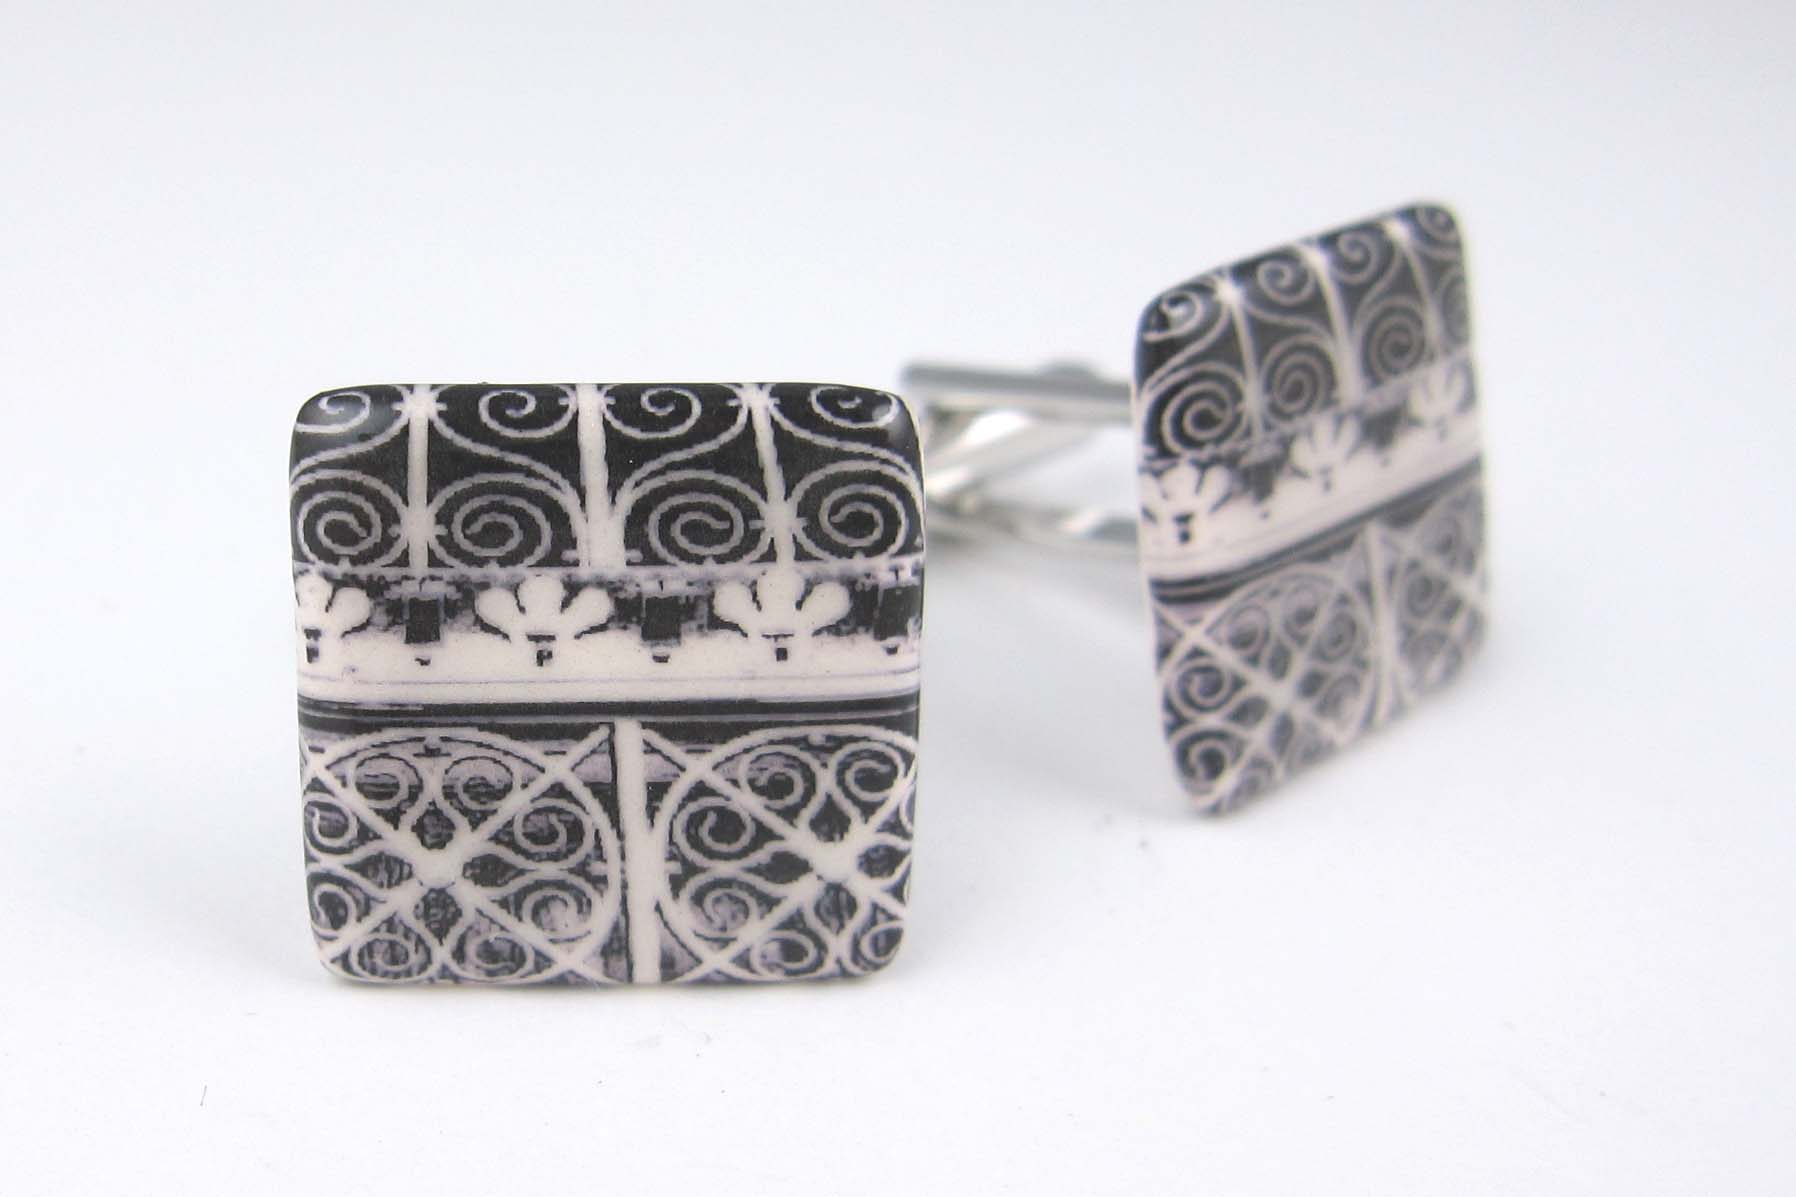 View Gonville and Caius College gates cufflinks